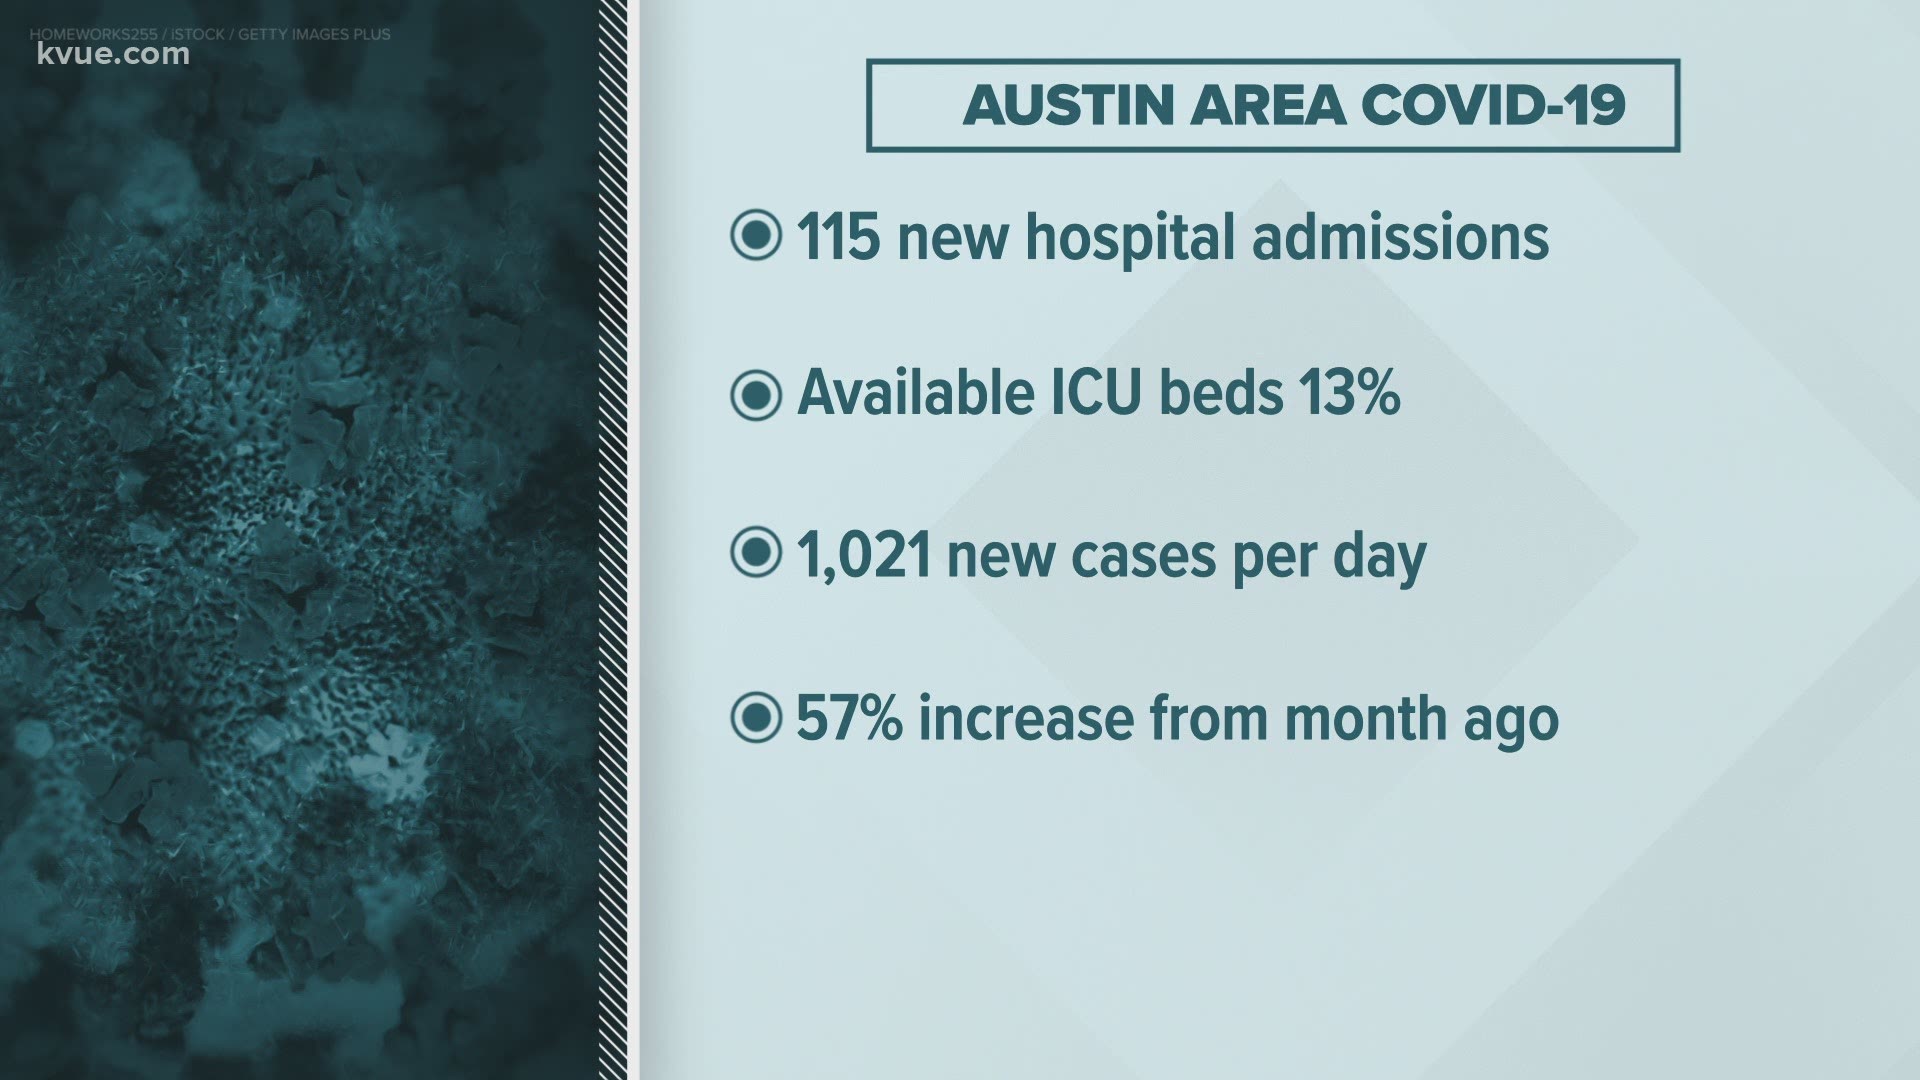 Austin's top doctor says local hospitals' ICUs will likely be out of beds by the end of next week. But it could be sooner if recent COVID-19 trends continue.